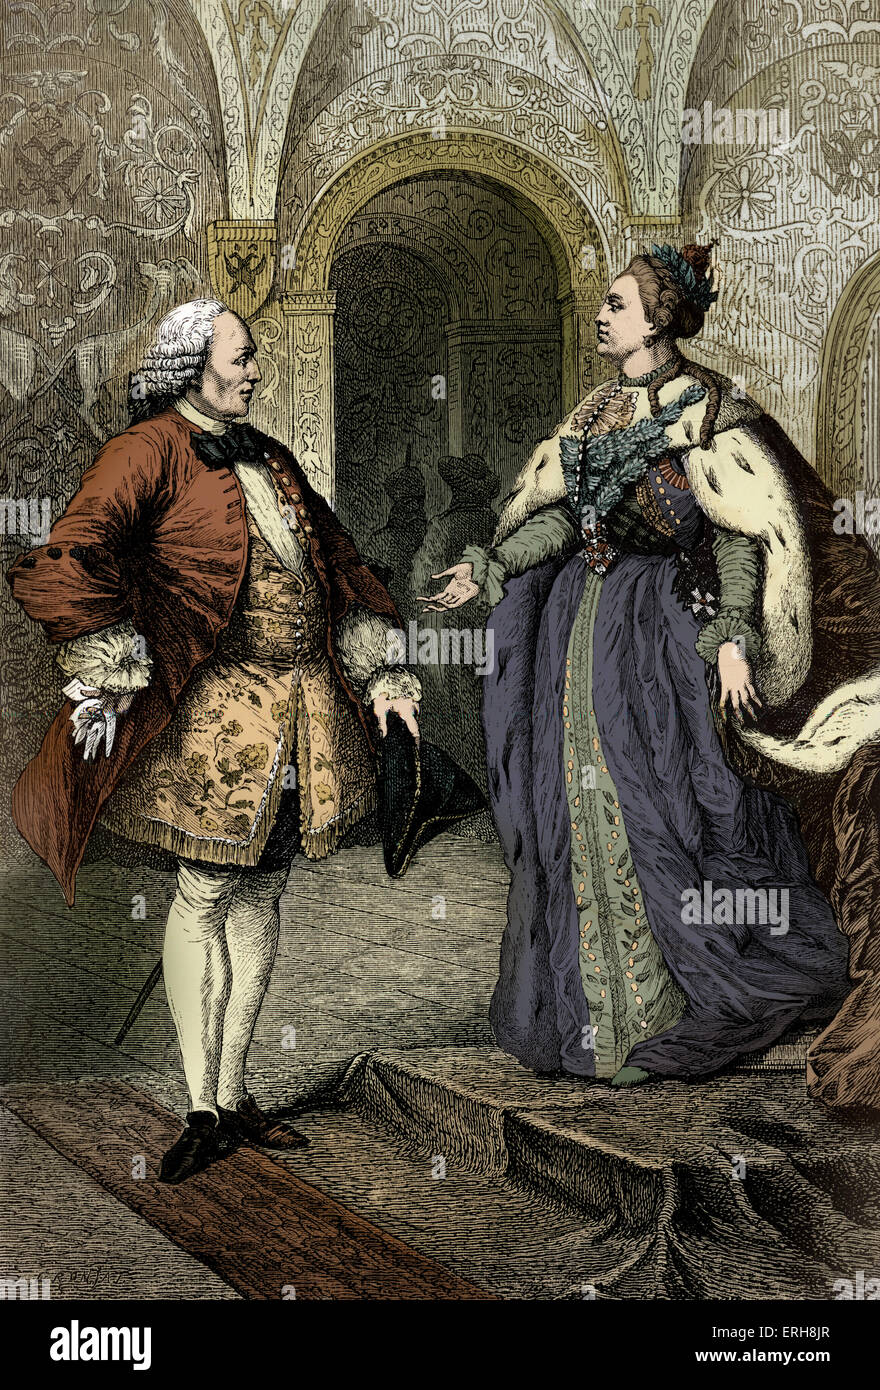 Denis Diderot and Catherine II / Catherine the Great - portrait of